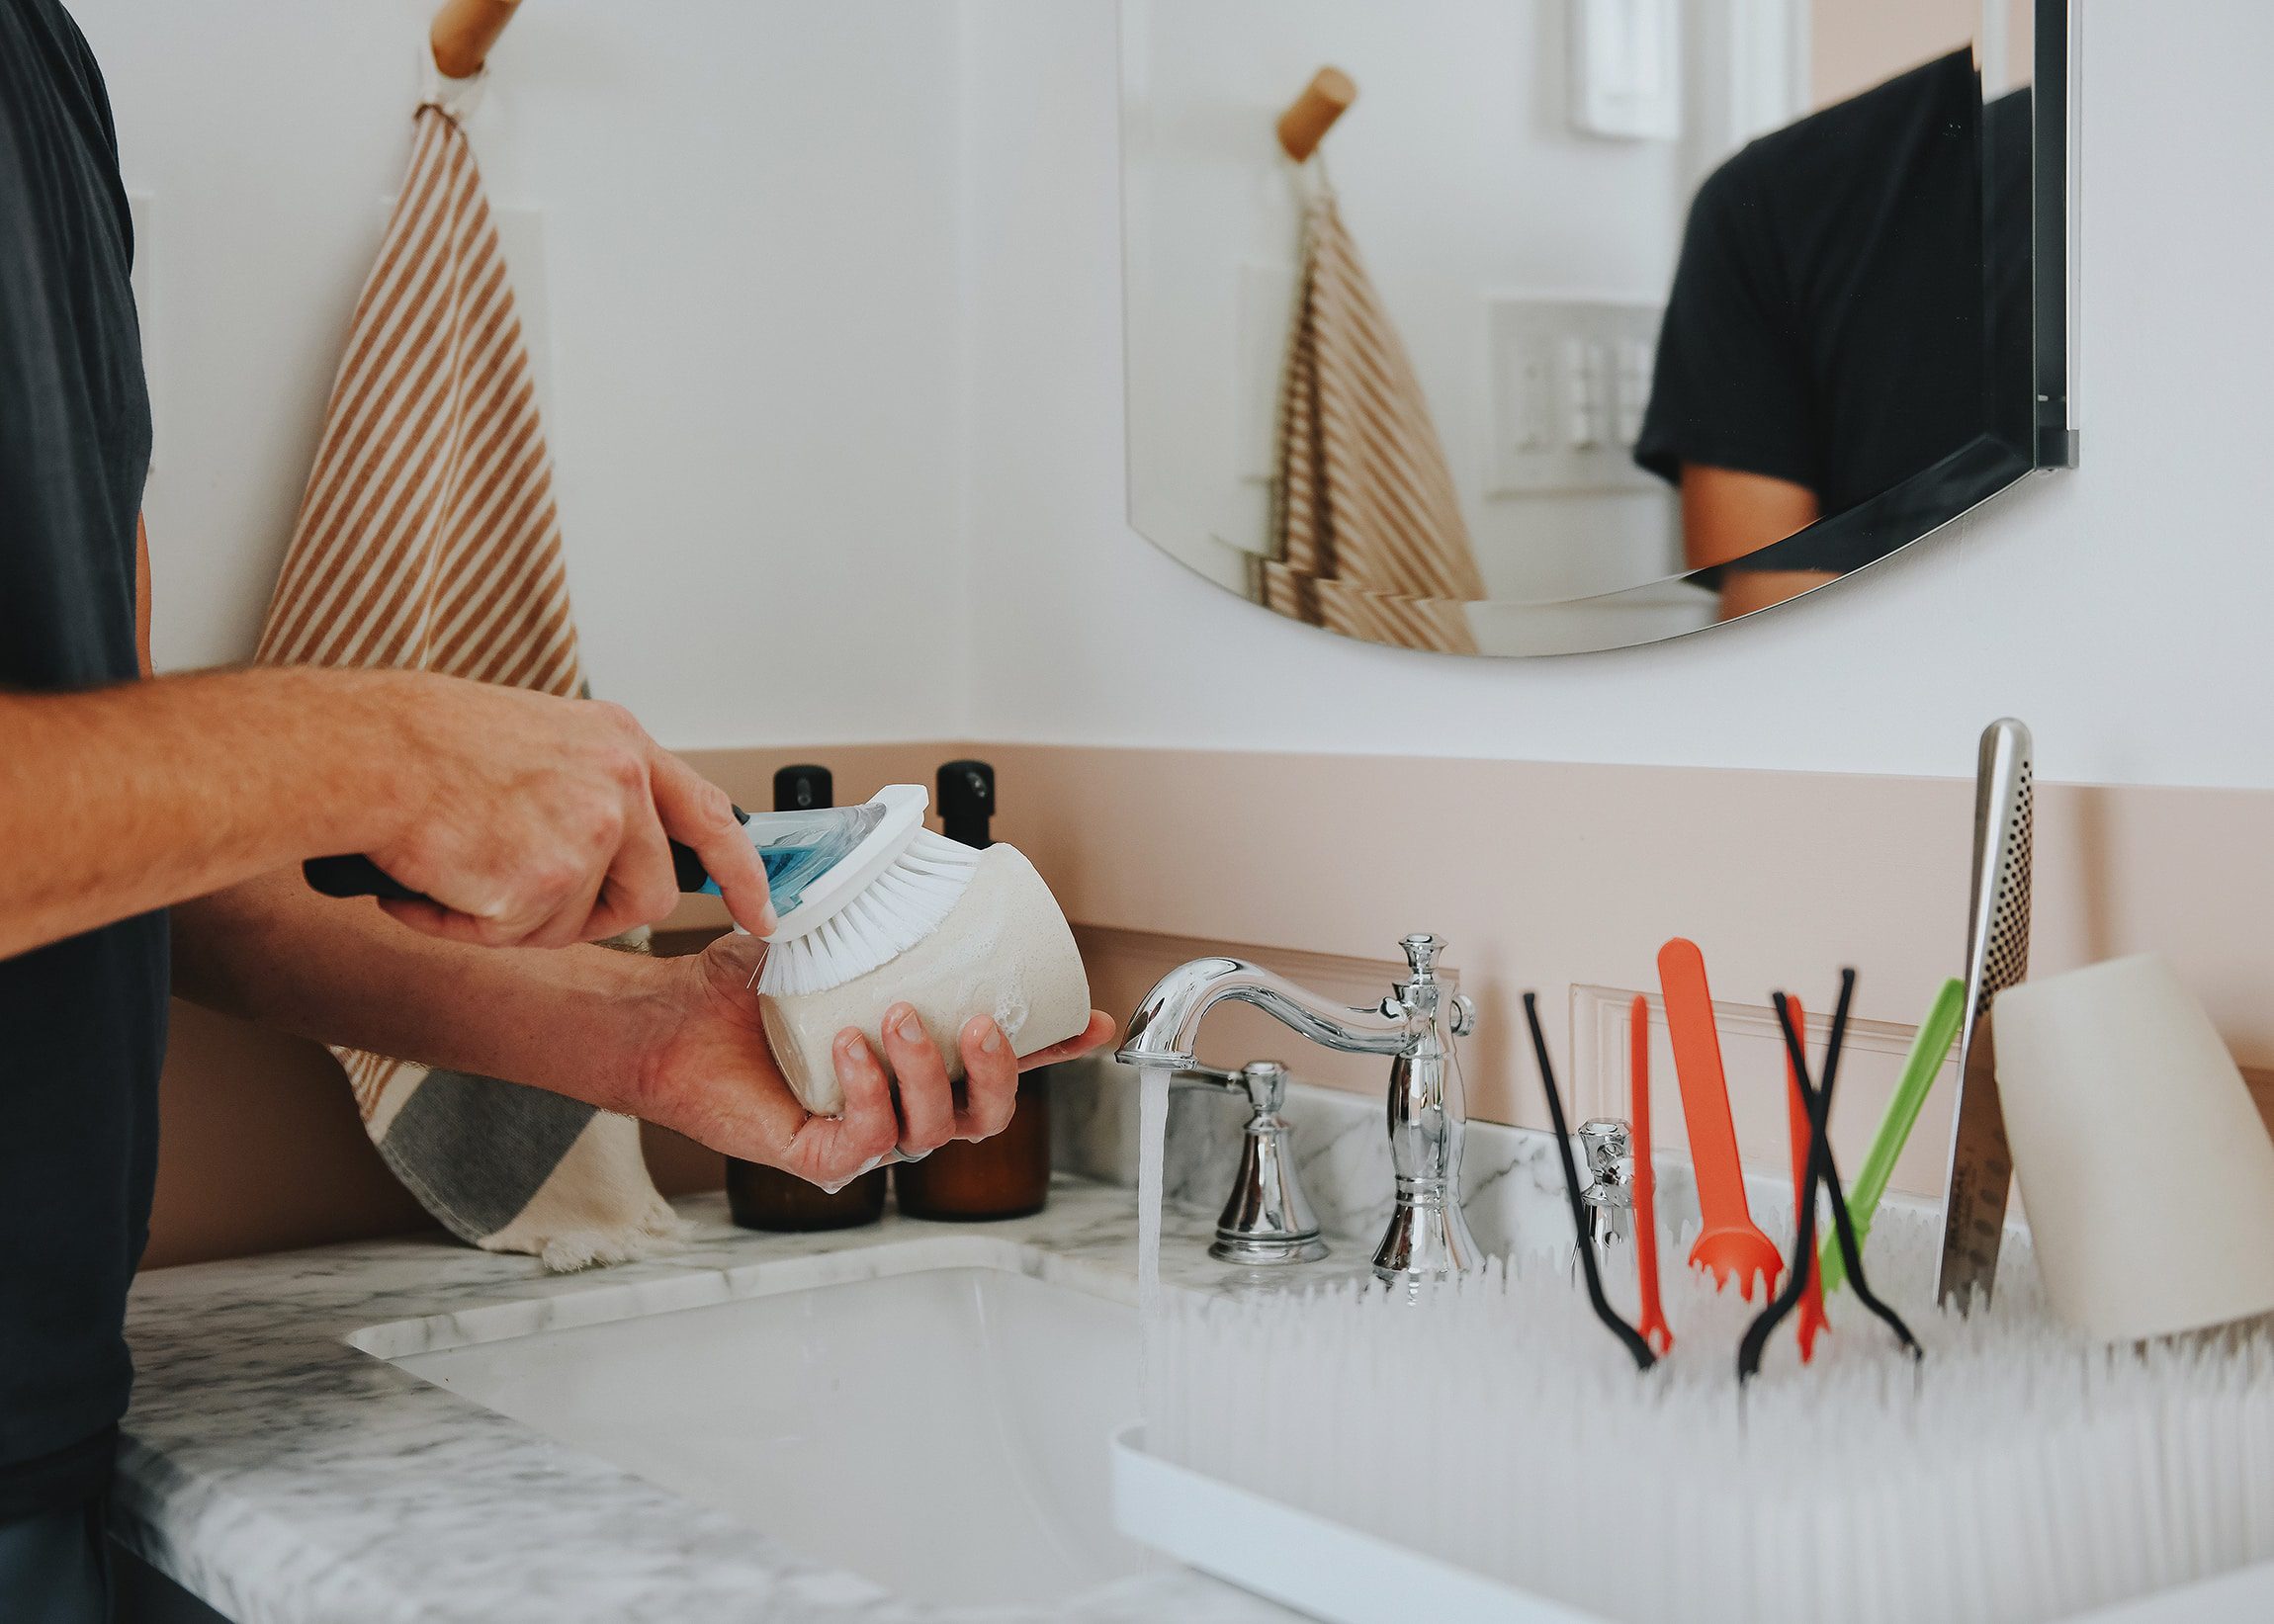 Cleaning dishes and reusable plastic serveware at the bathroom sink | How we've gotten by for 2 months without a working kitchen | via Yellow Brick Home